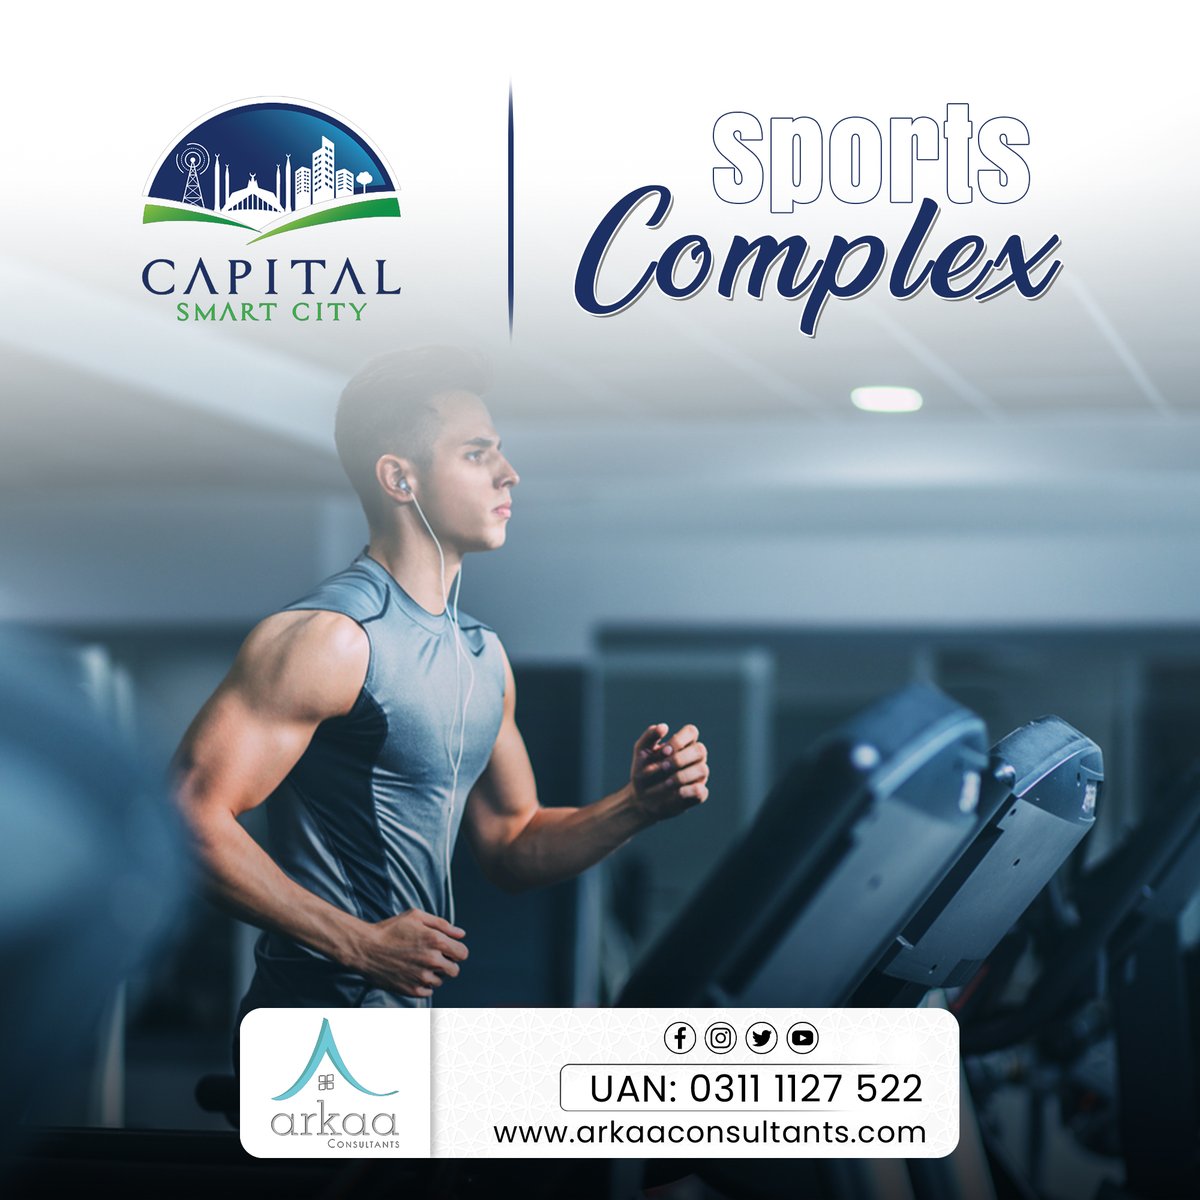 An exclusive development offering indicative living facilities within a community of like-minded professionals

#capitalsmartcity #arkaaconsultants #smartinterchange #SmartCities #CSC #islamabad   #CapitalSmartCityIslamabad #SportsComplex #HealthMattersMost #stayfitandhealthy